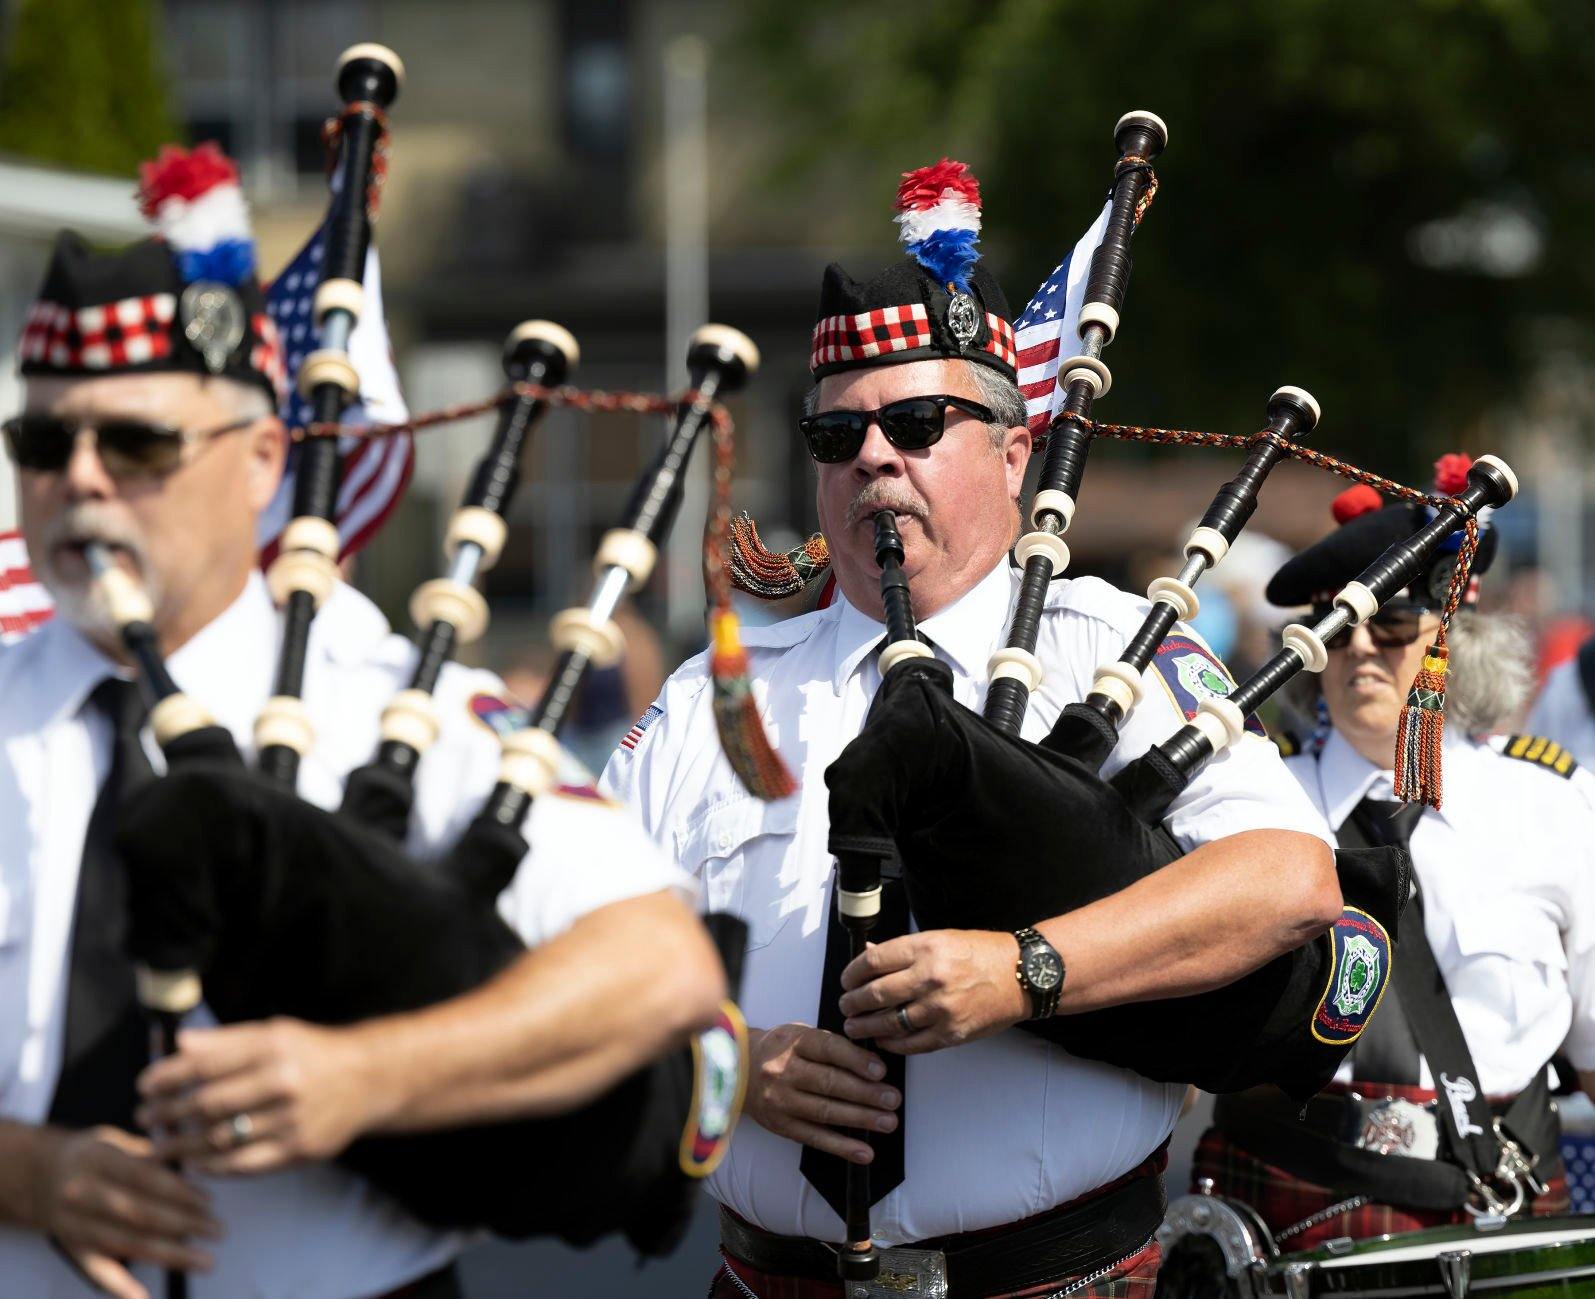 Spivey plays the bagpipe in numerous events, such as with Dubuque Fire Pipes & Drums during the recent Heritage Days in Bellevue, Iowa.    PHOTO CREDIT: Stephen Gassman